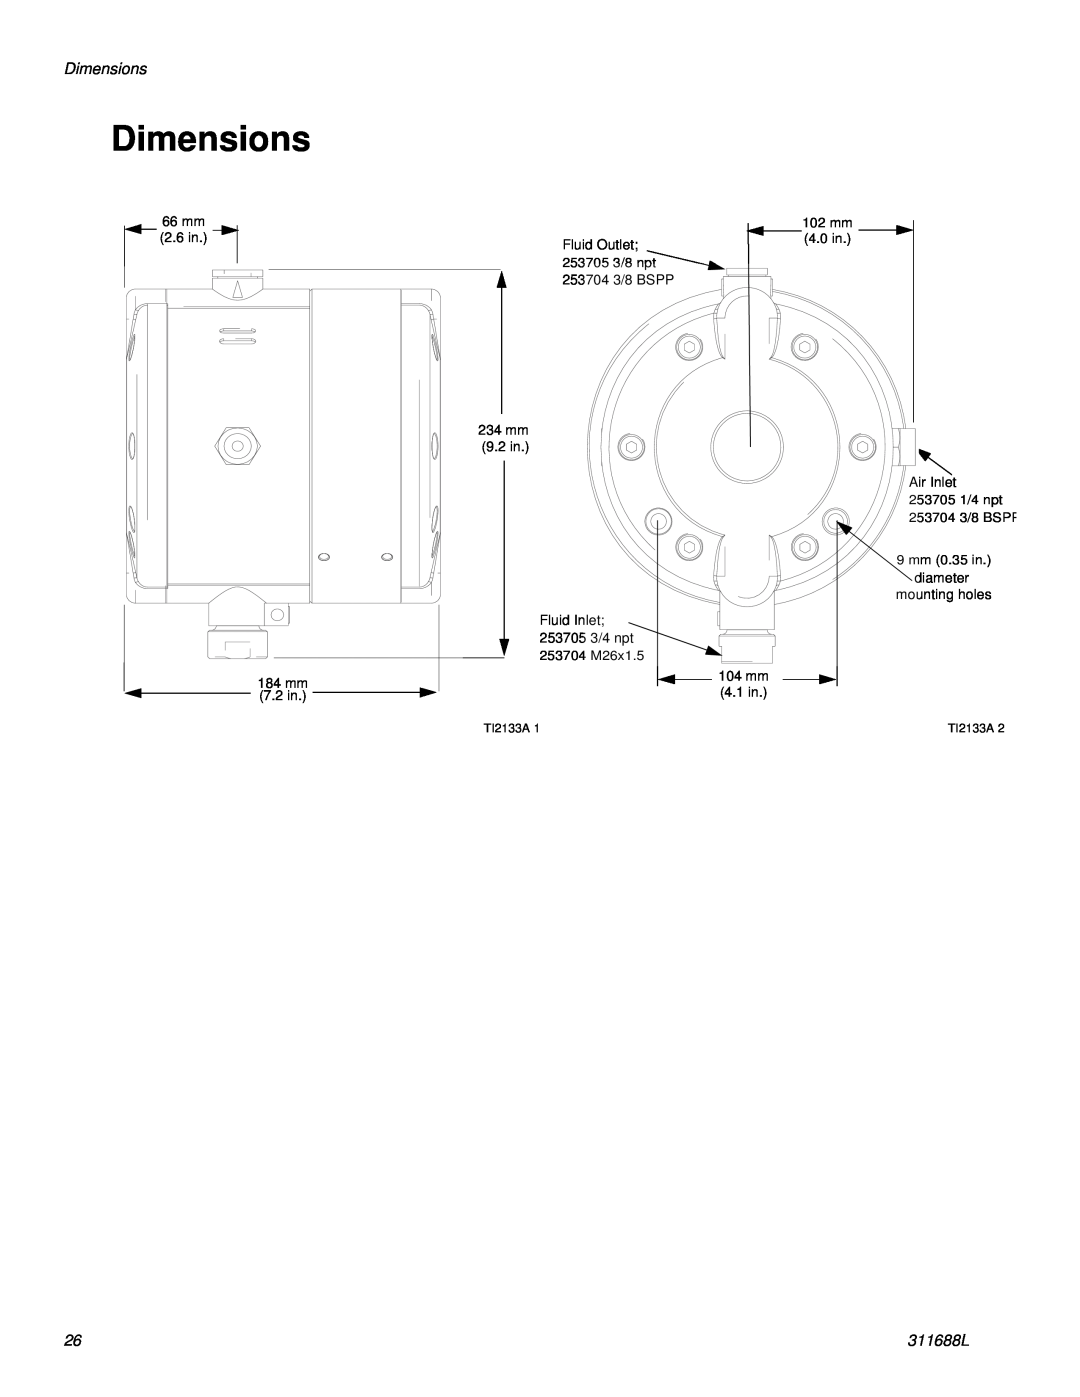 Graco 311688L important safety instructions Dimensions, TI2133A 